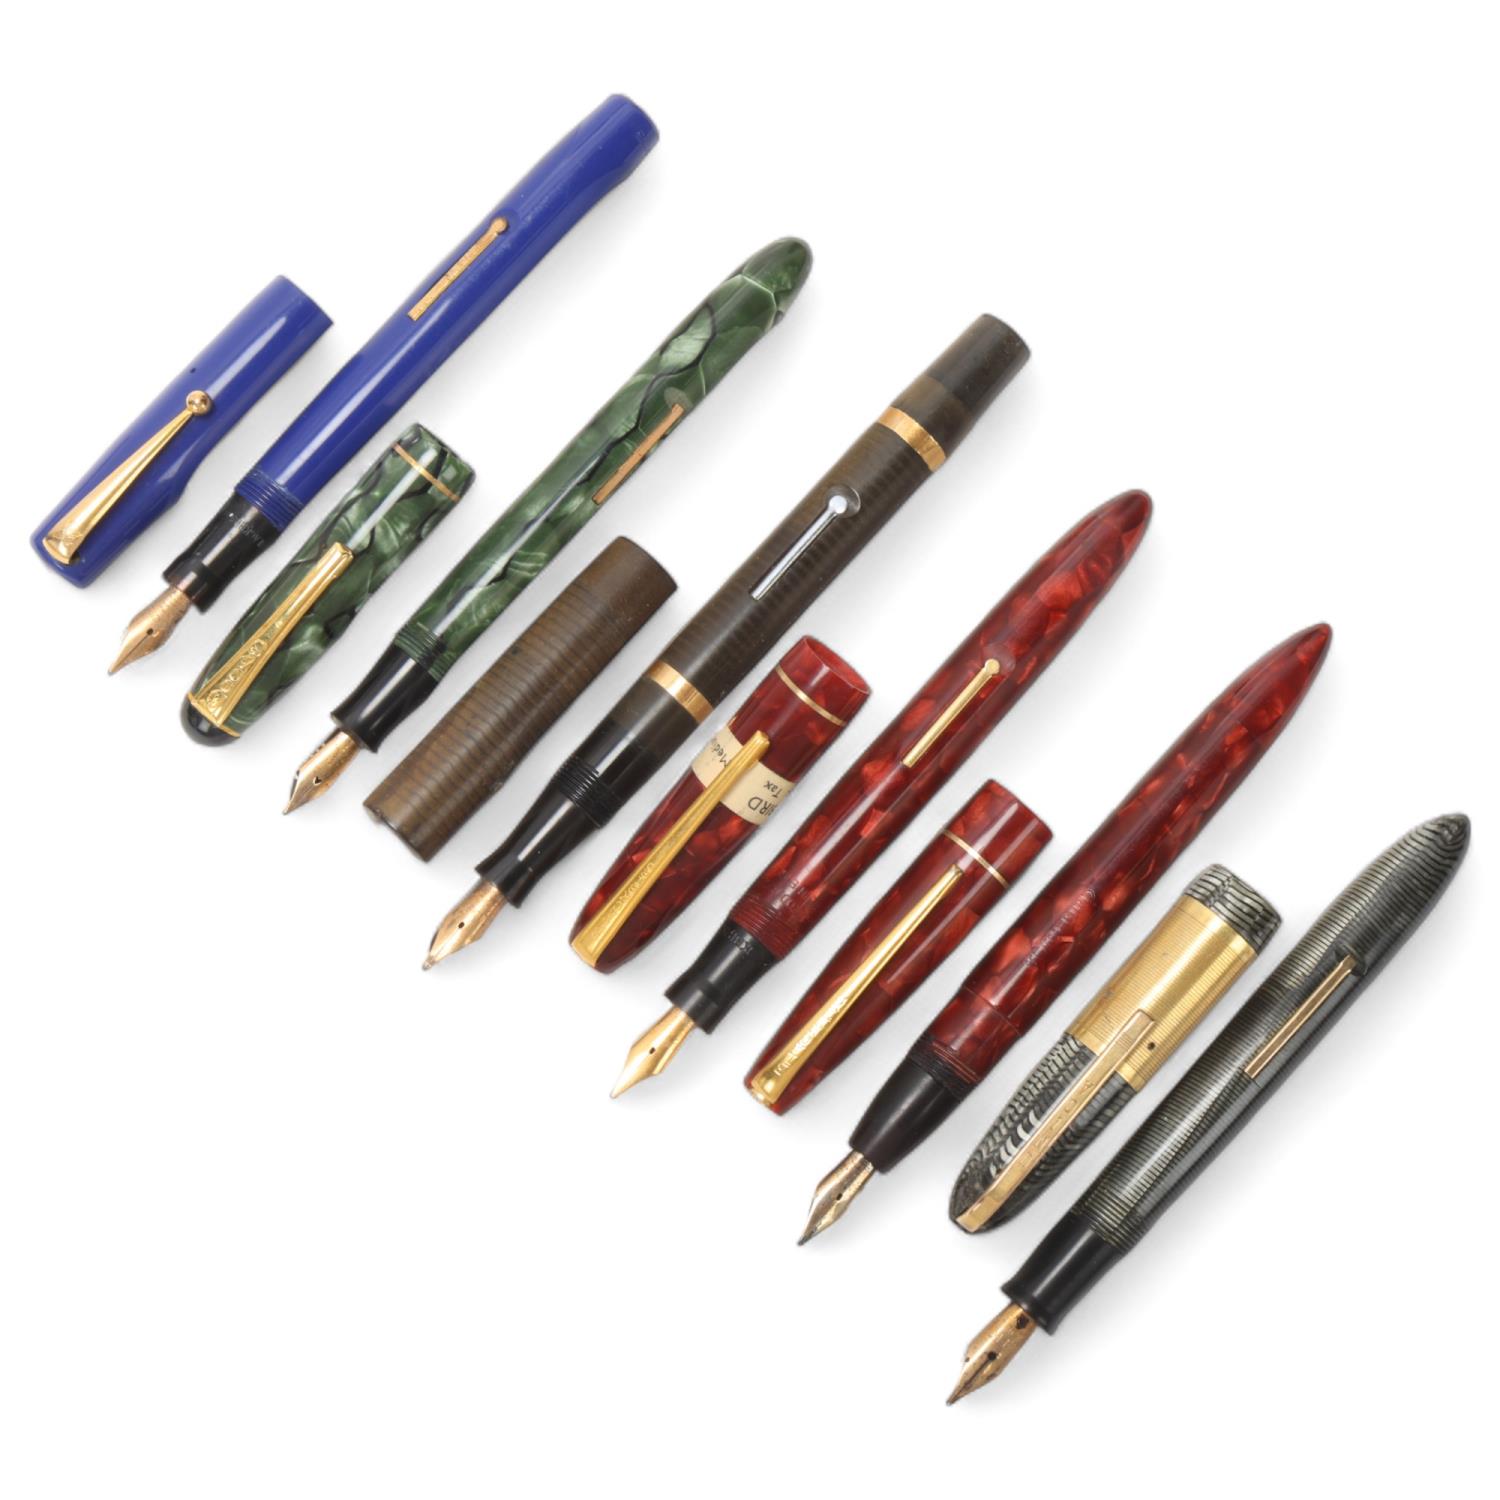 6 vintage fountain pens, 4x Mabie, Todd & Co. - Blackbird, 1 Boots and a Unica, all with 14ct gold